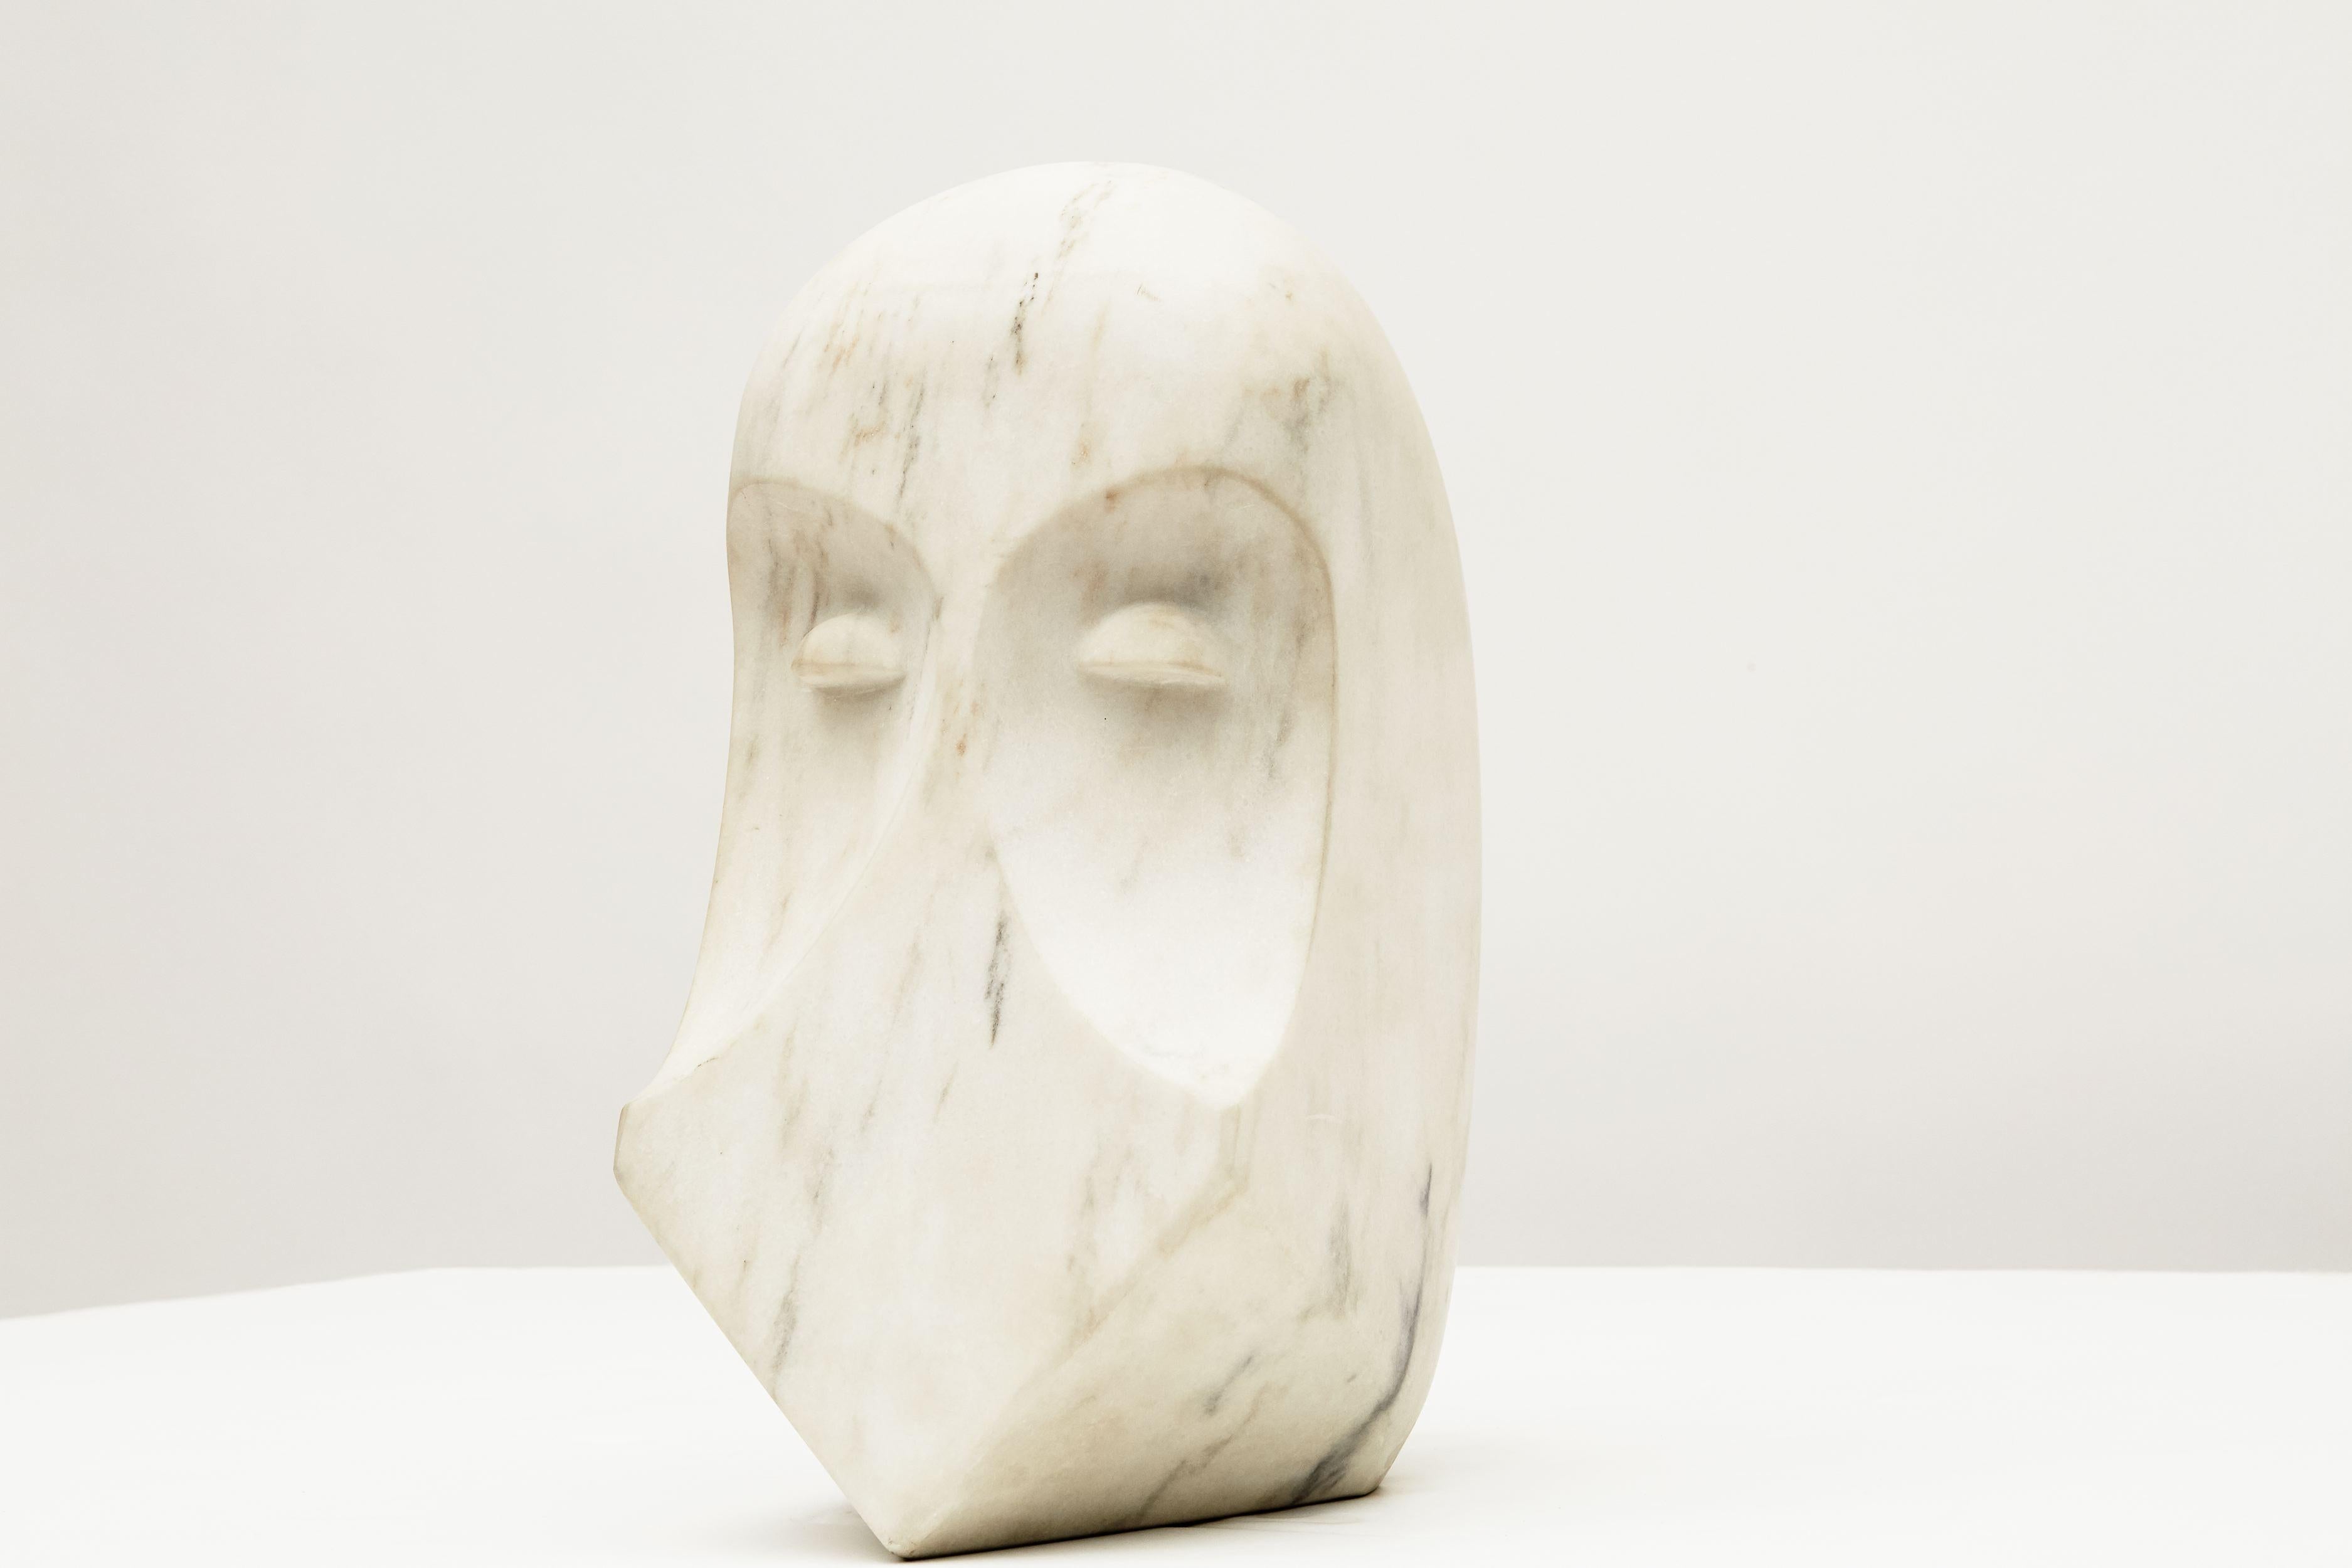 Inscribed: CLF 
Unique piece.

The simple mouthless face is cut cleanly into this smooth piece of white Alabama white marble--an intimation of the code after which the piece is named.
  